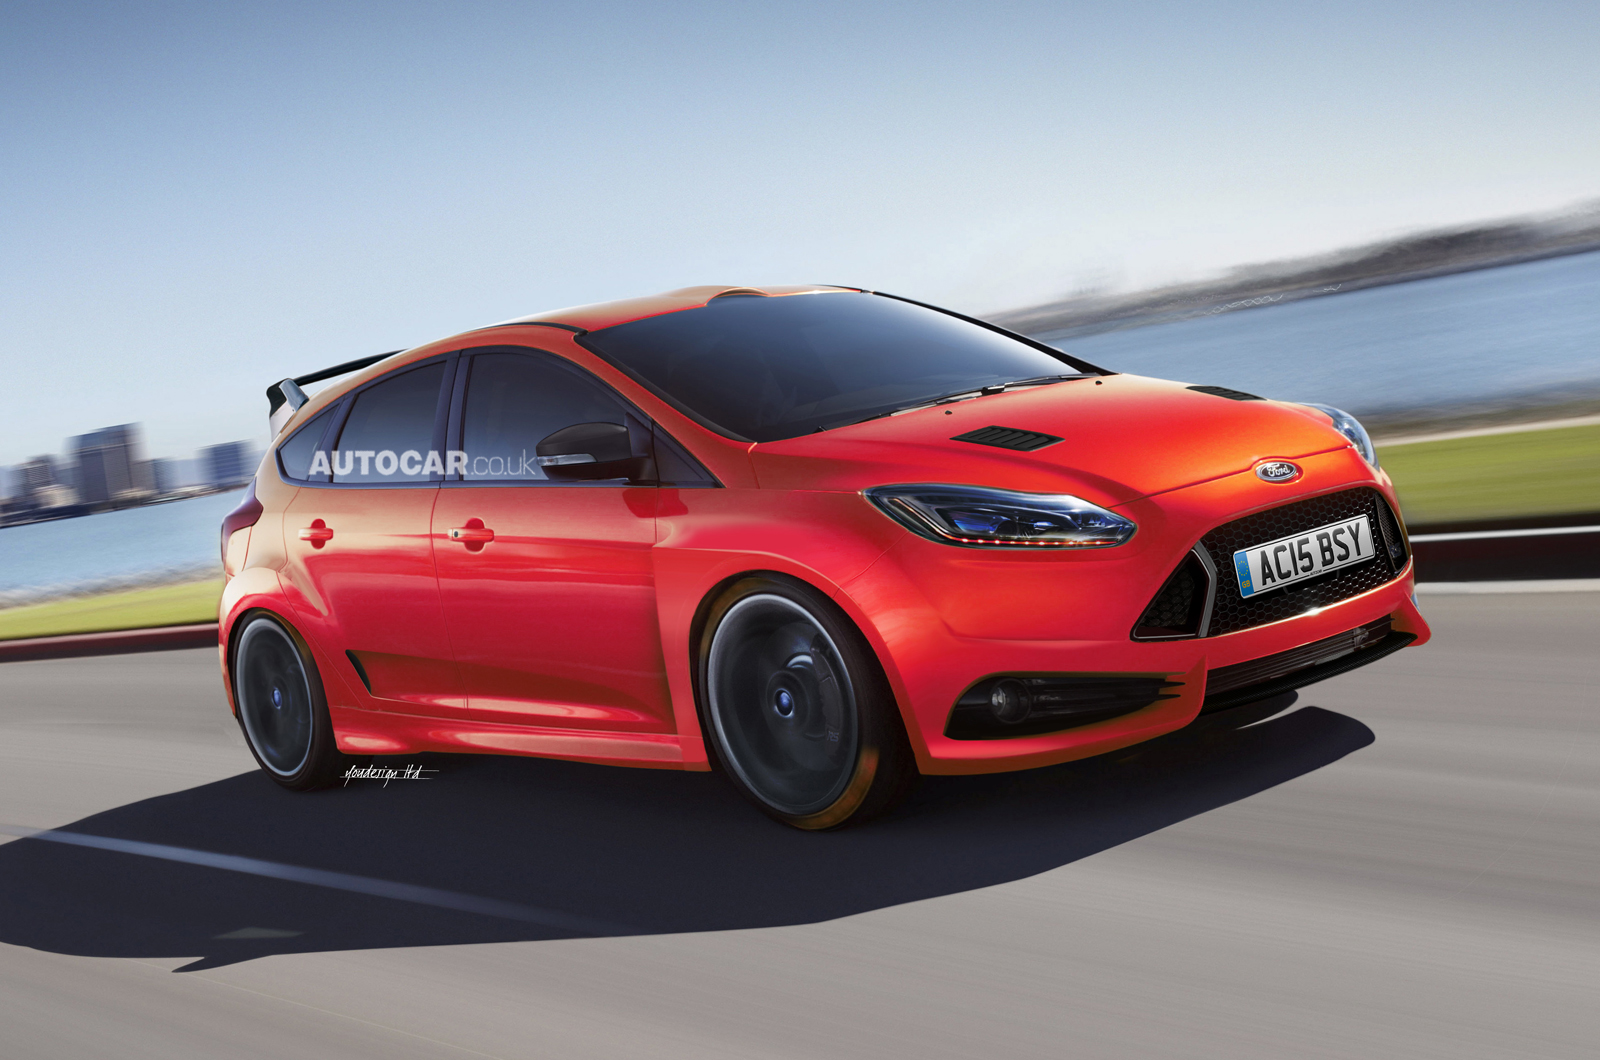 Autocar Reports Focus Rs Coming In 2015 Basic Engine Shared With